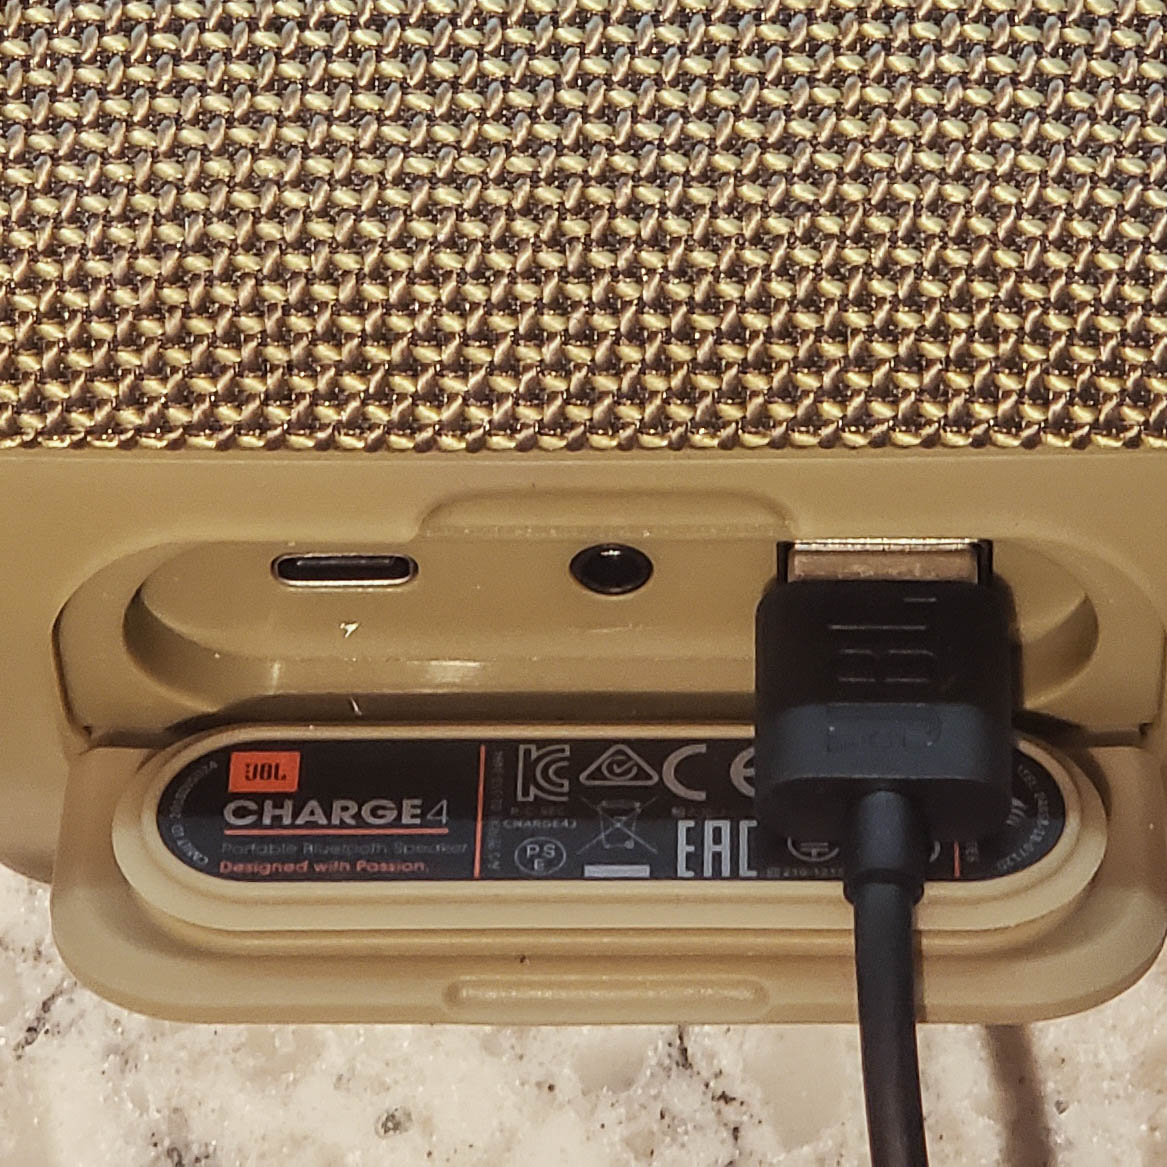 smerte Tidlig Champagne JBL Charge 4 - Tech Review | Busted Wallet